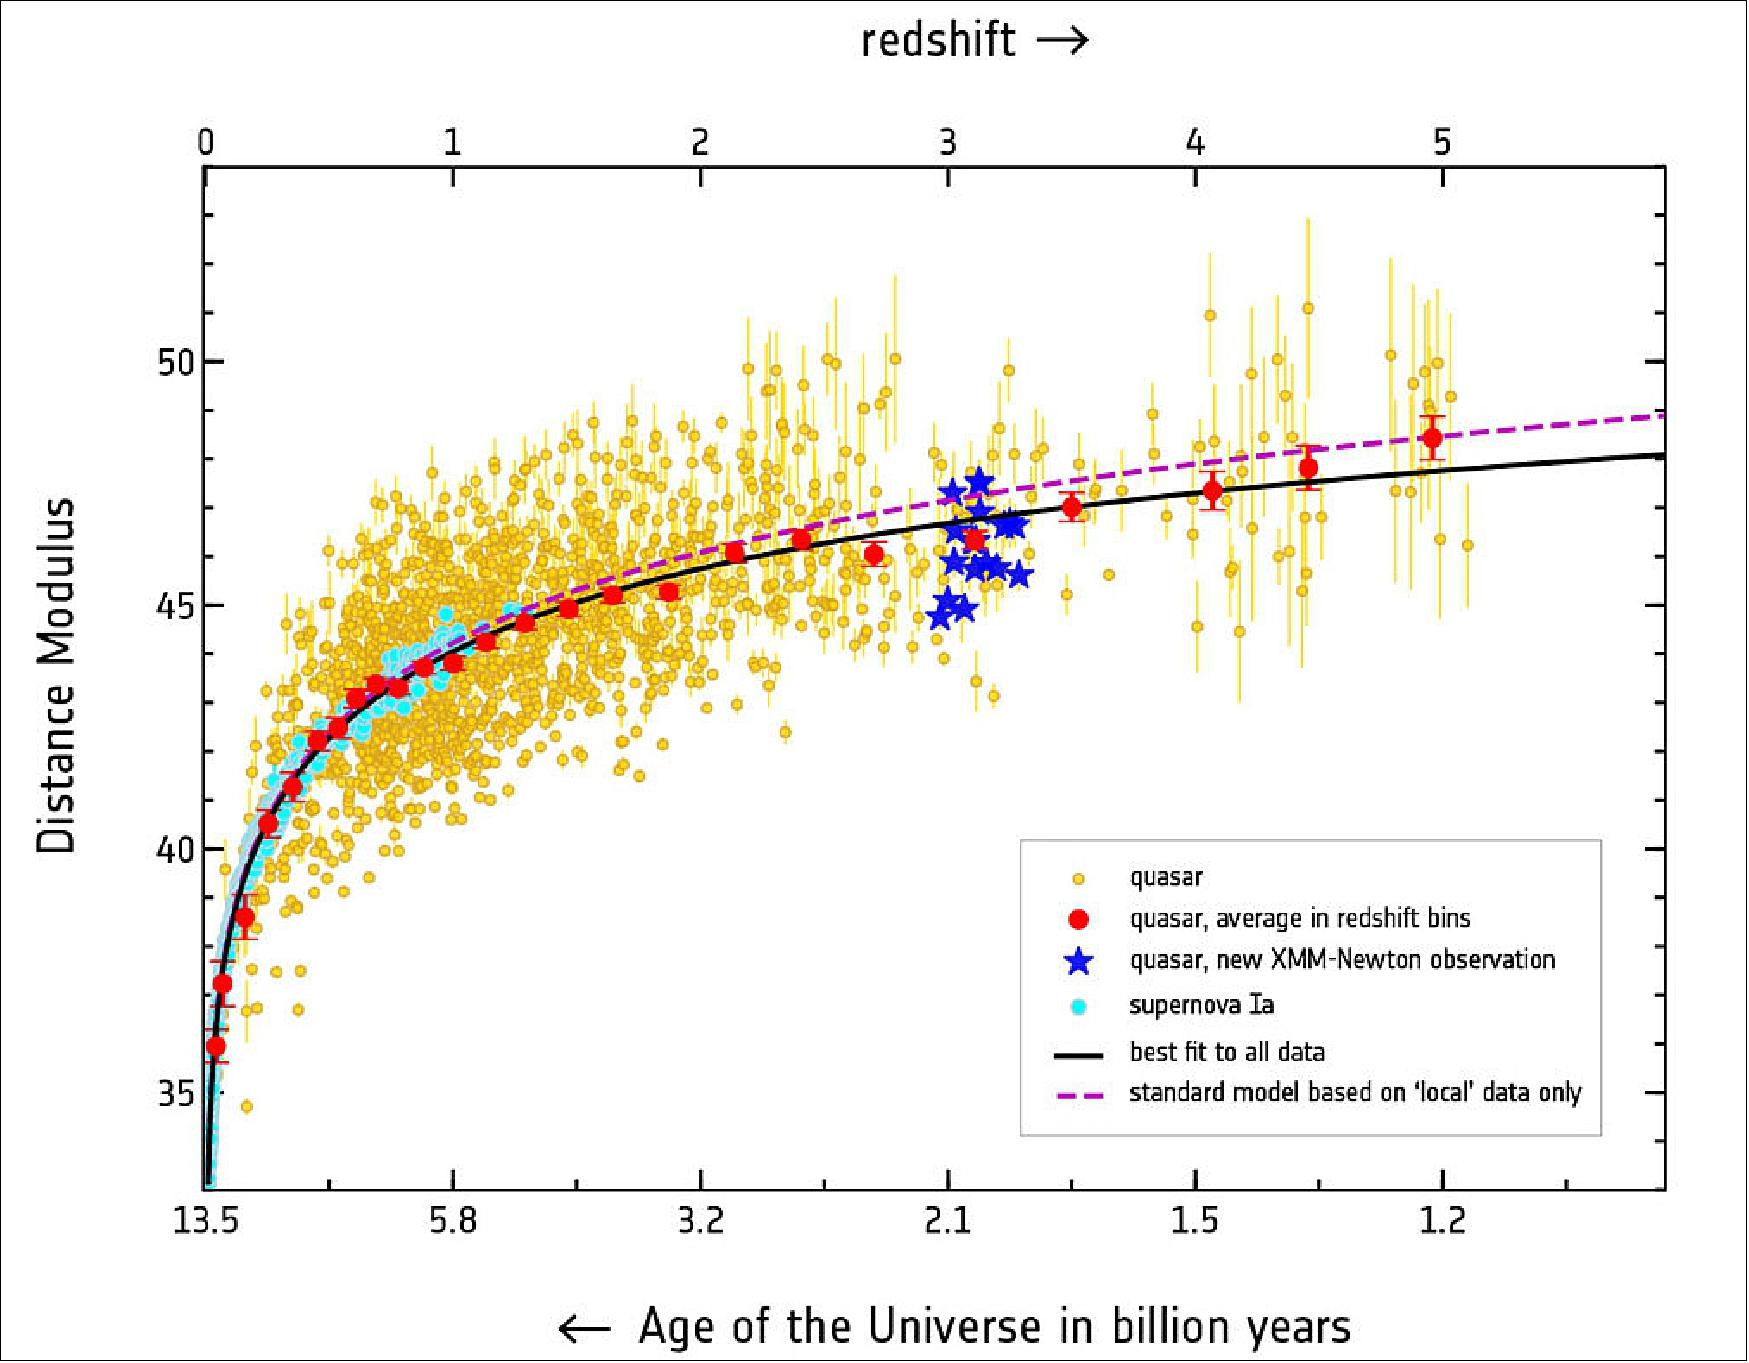 Figure 64: The graph showing measurements of the distance to astronomical objects such as type-Ia supernovas (cyan symbols) and quasars (yellow, red and blue symbols) that can be used to study the expansion history of the Universe. Type-Ia supernovas are the most notable class of ‘standard candles’– astronomical sources whose properties allow us to gauge their distances. They consist of the spectacular demise of white dwarf stars after they have over-filled on material from a companion star, generating explosions of predictable brightness that allows astronomers to pinpoint the distance. Observations of these supernovas in the late 1990s revealed the Universe’s accelerated expansion over the last few billion years [image credit: Elisabeta Lusso & Guido Risaliti (2019)]